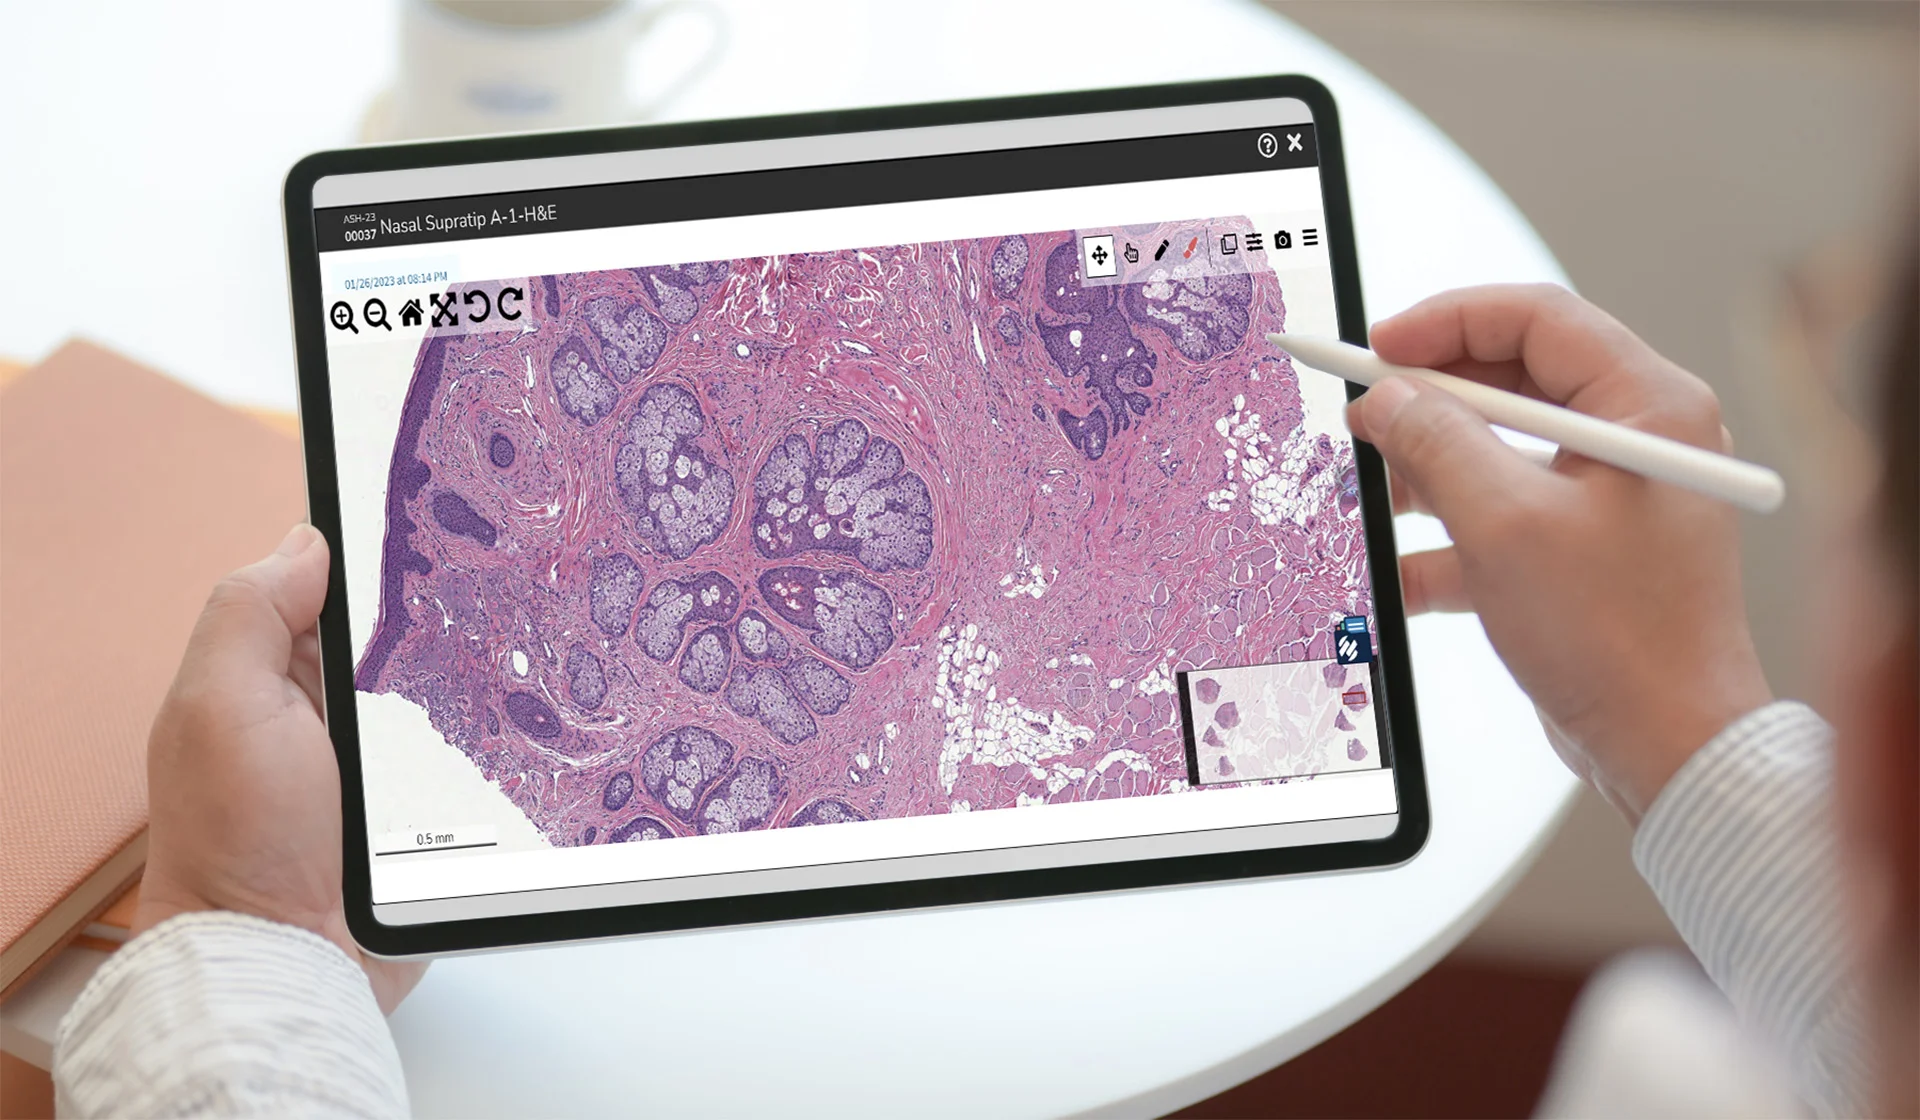 Digital Dermatologist Read out a case on an iPad